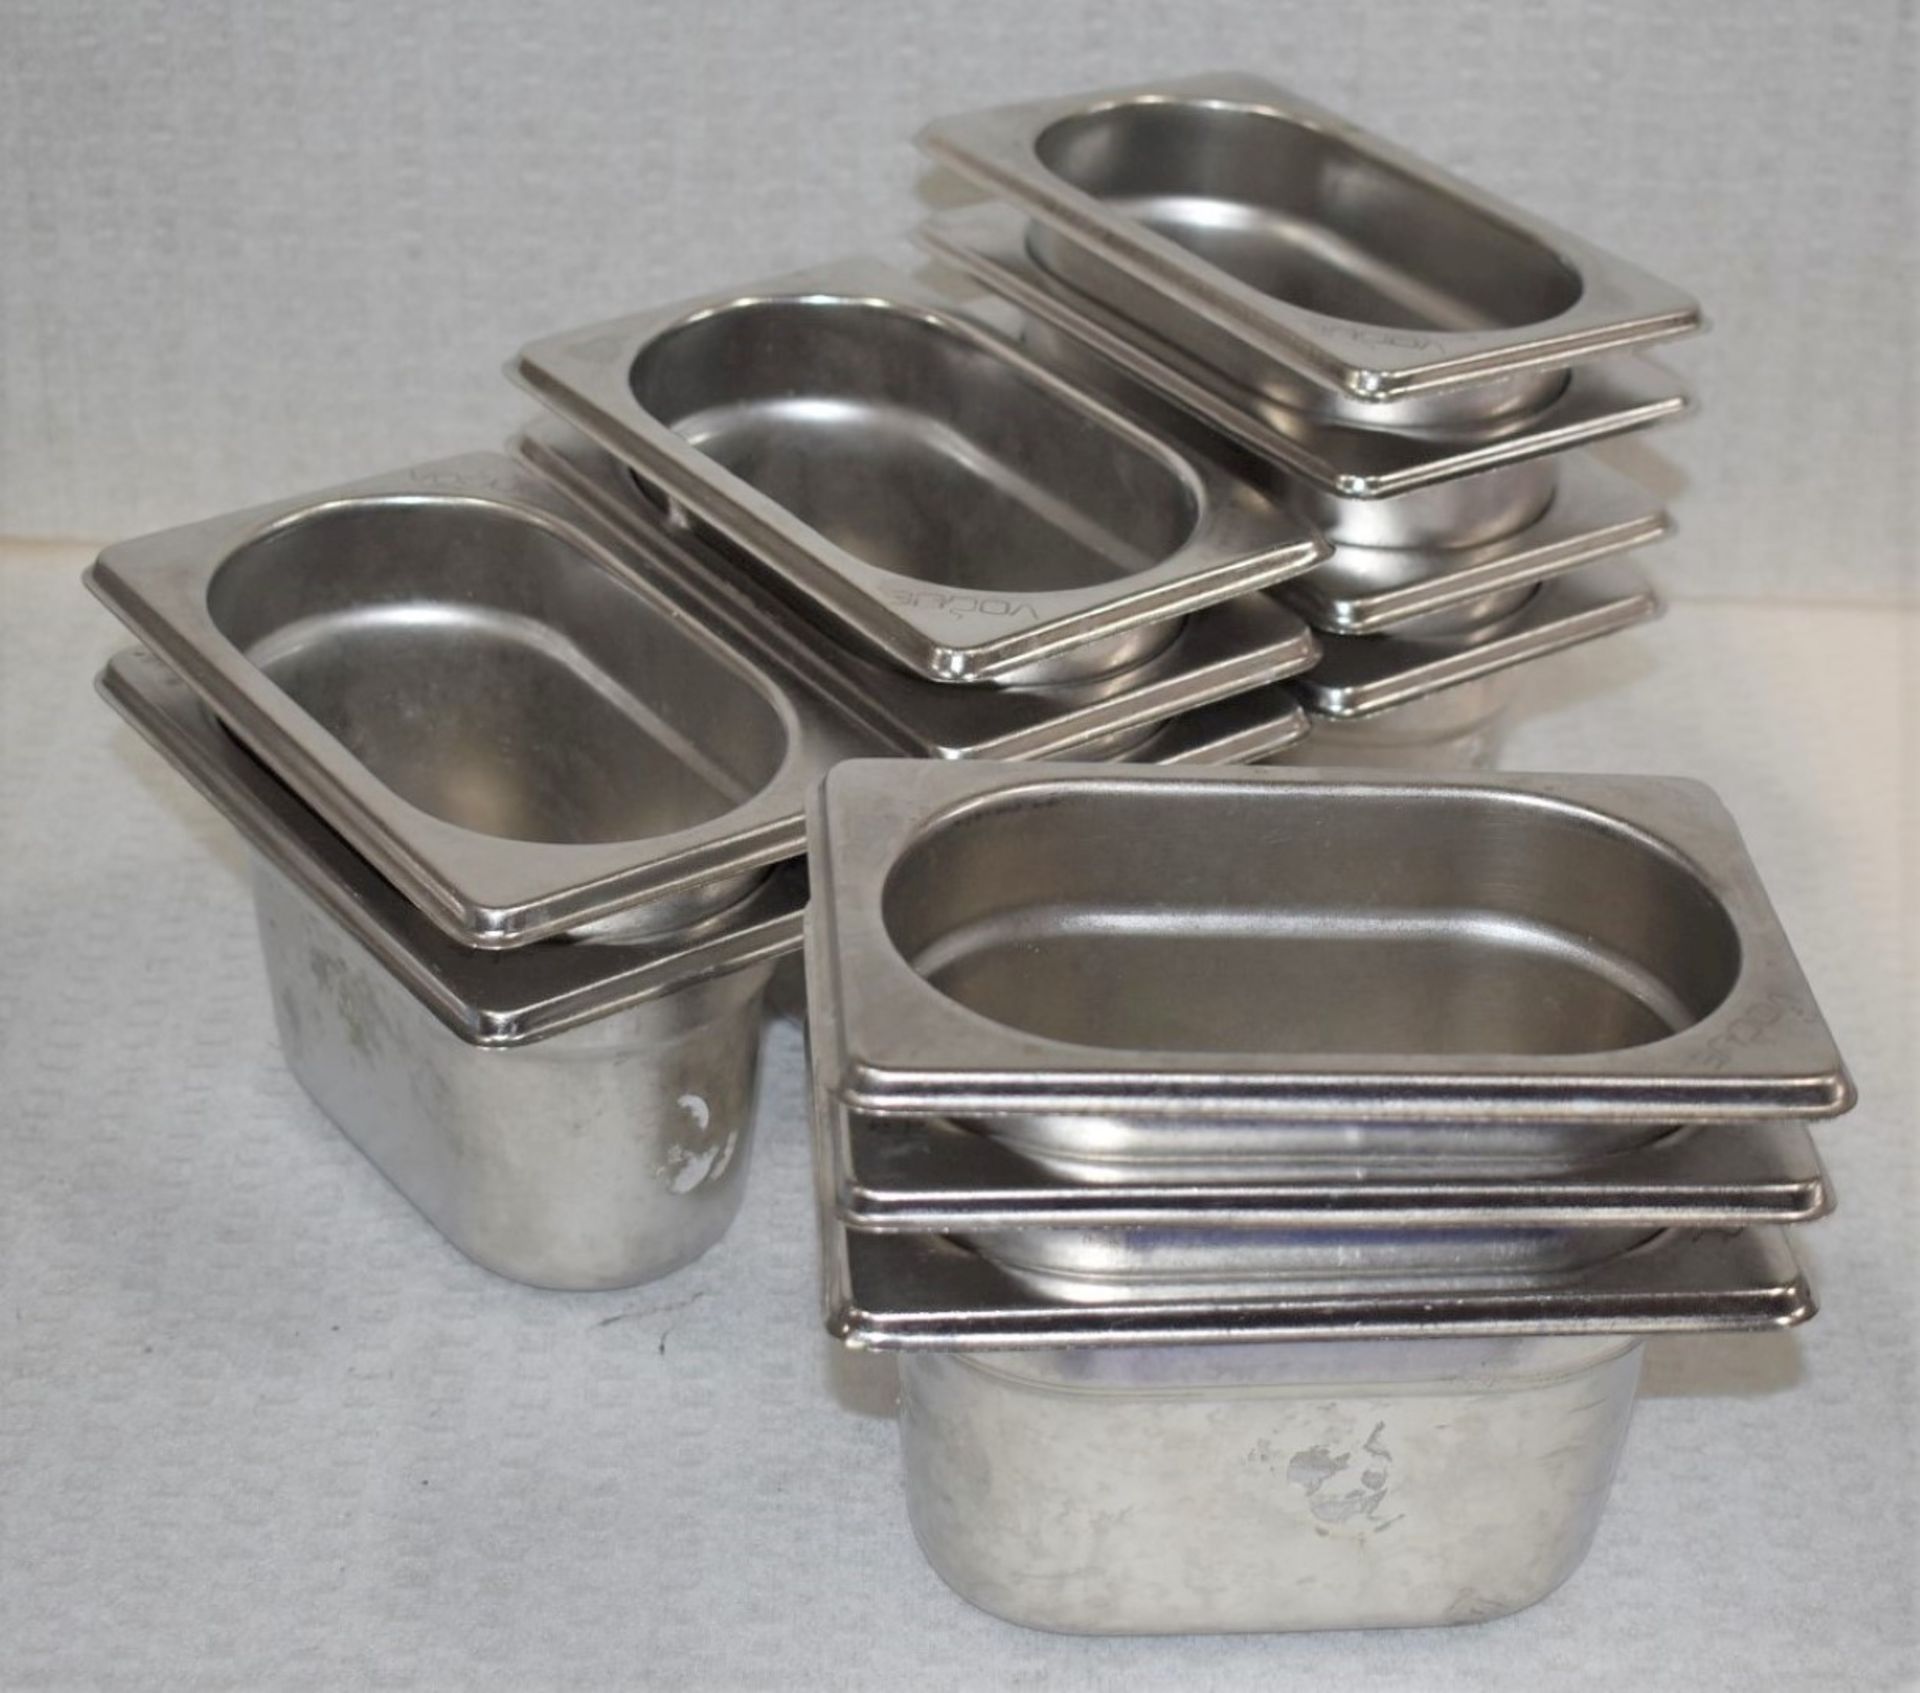 12 x Vogue Stainless Steel 1/9 Gastronorm Pans Without Lids - Size: H10 x W10.5 x L17.5 cms - - Image 2 of 2